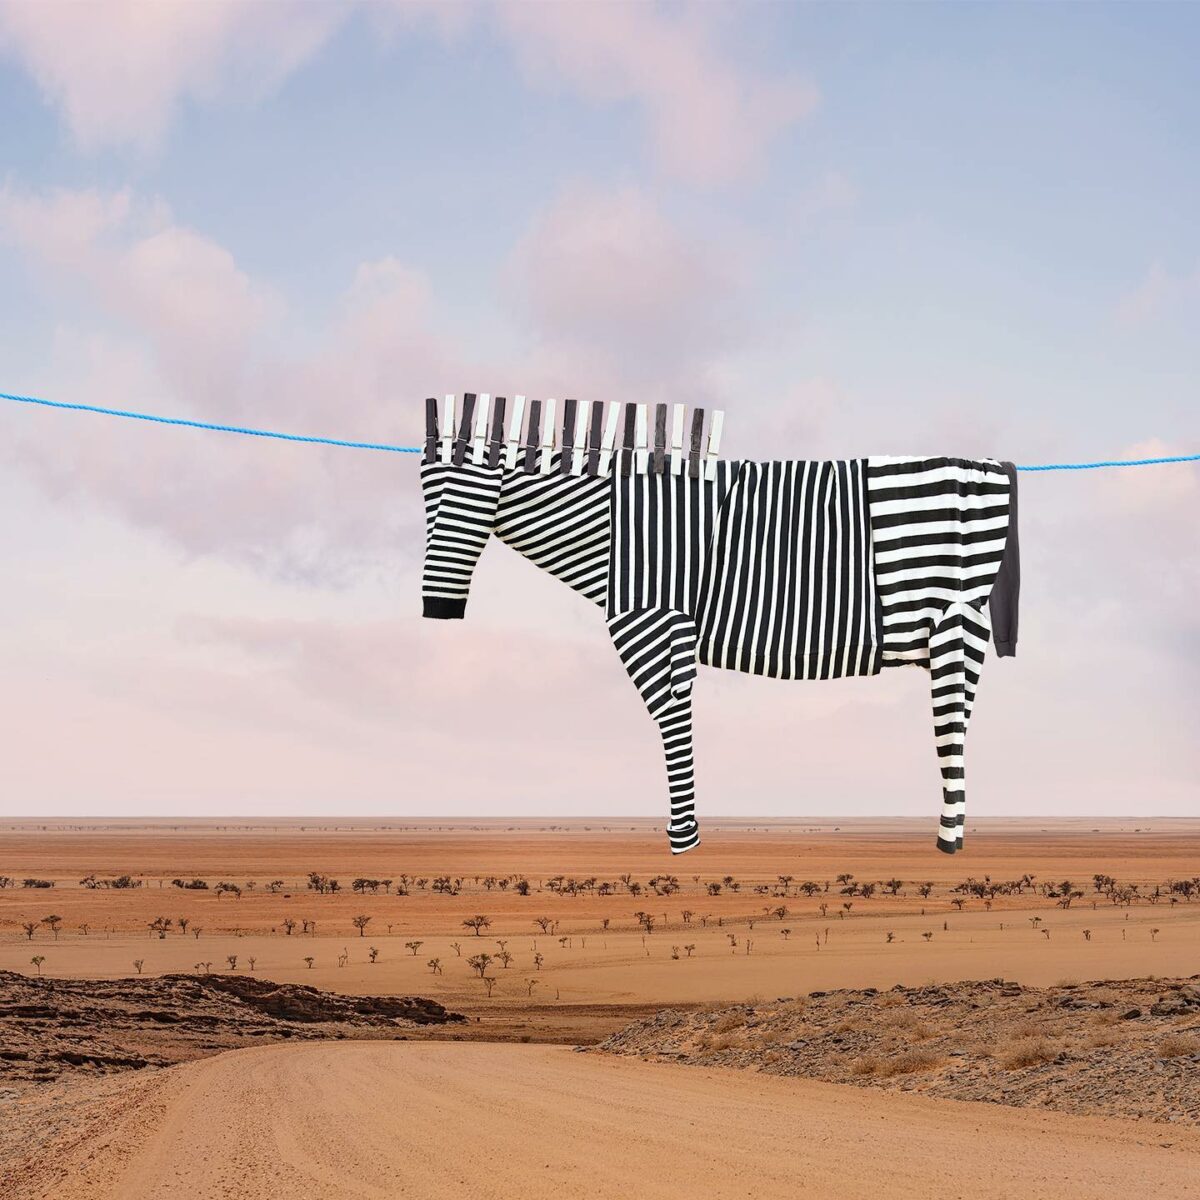 New playful creative photographs made with household objects by Helga Stentzel